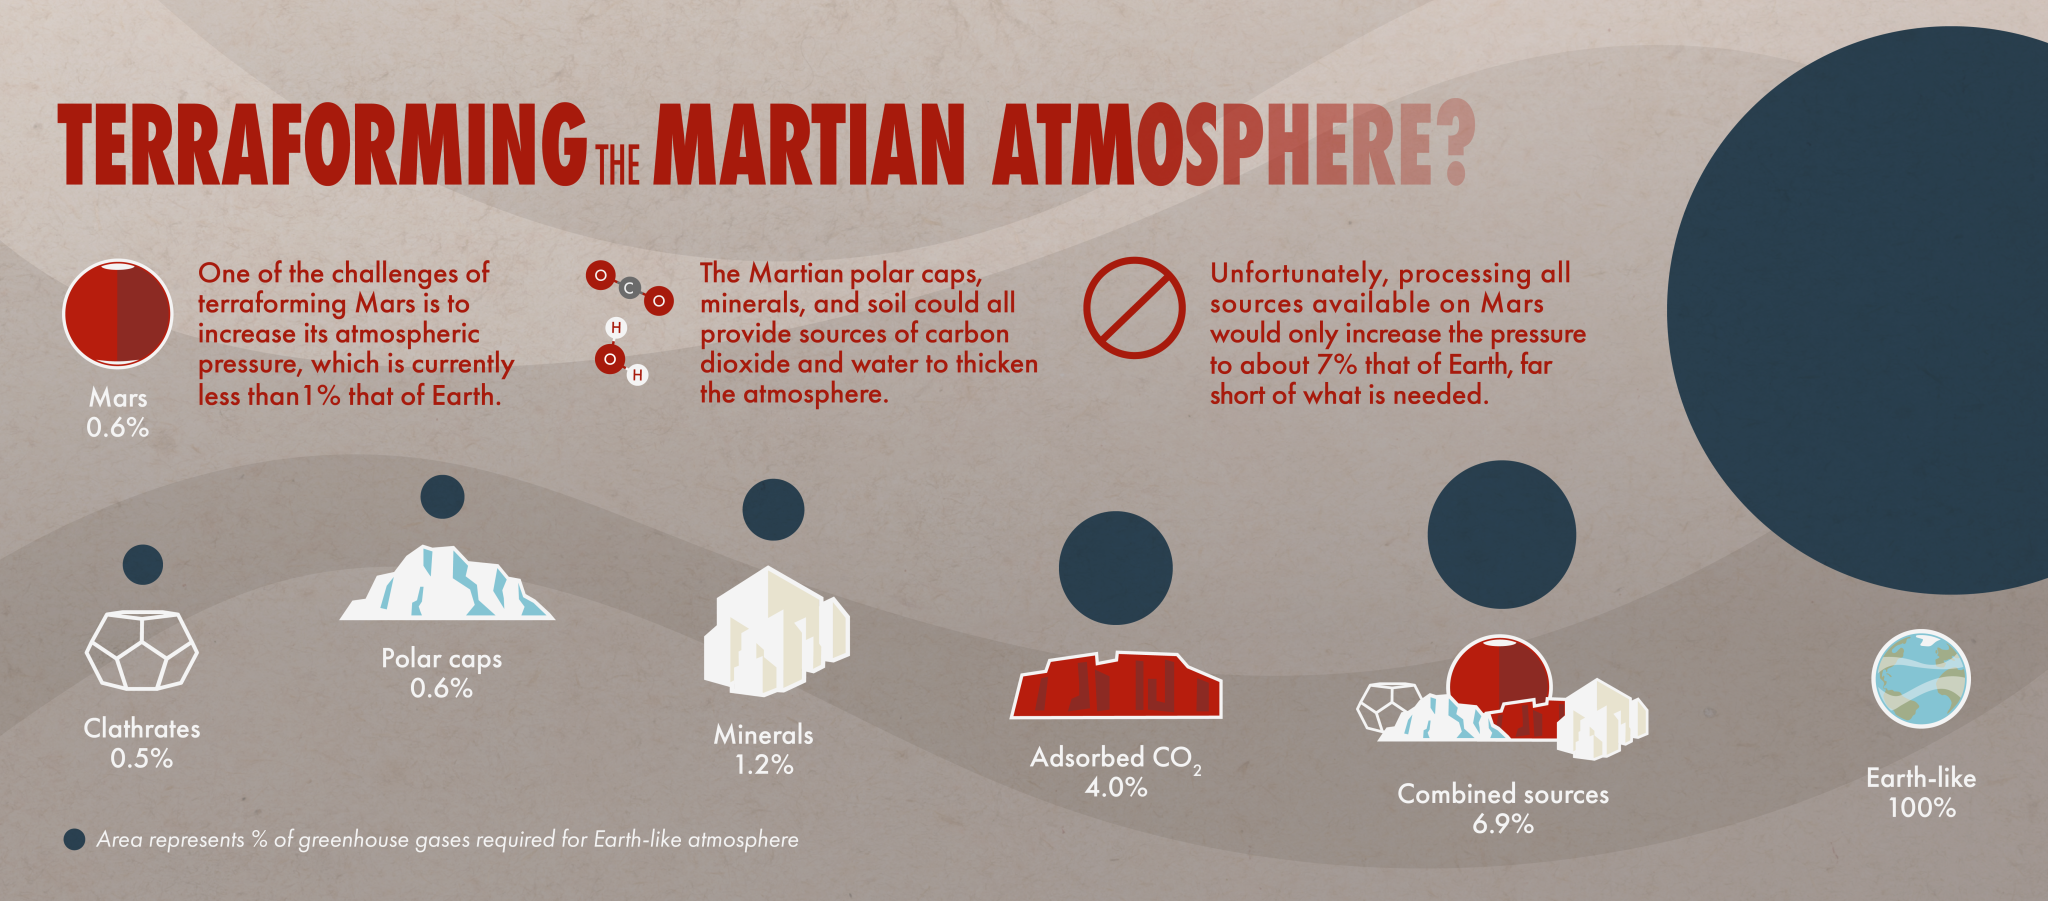 various sources of carbon dioxide on Mars